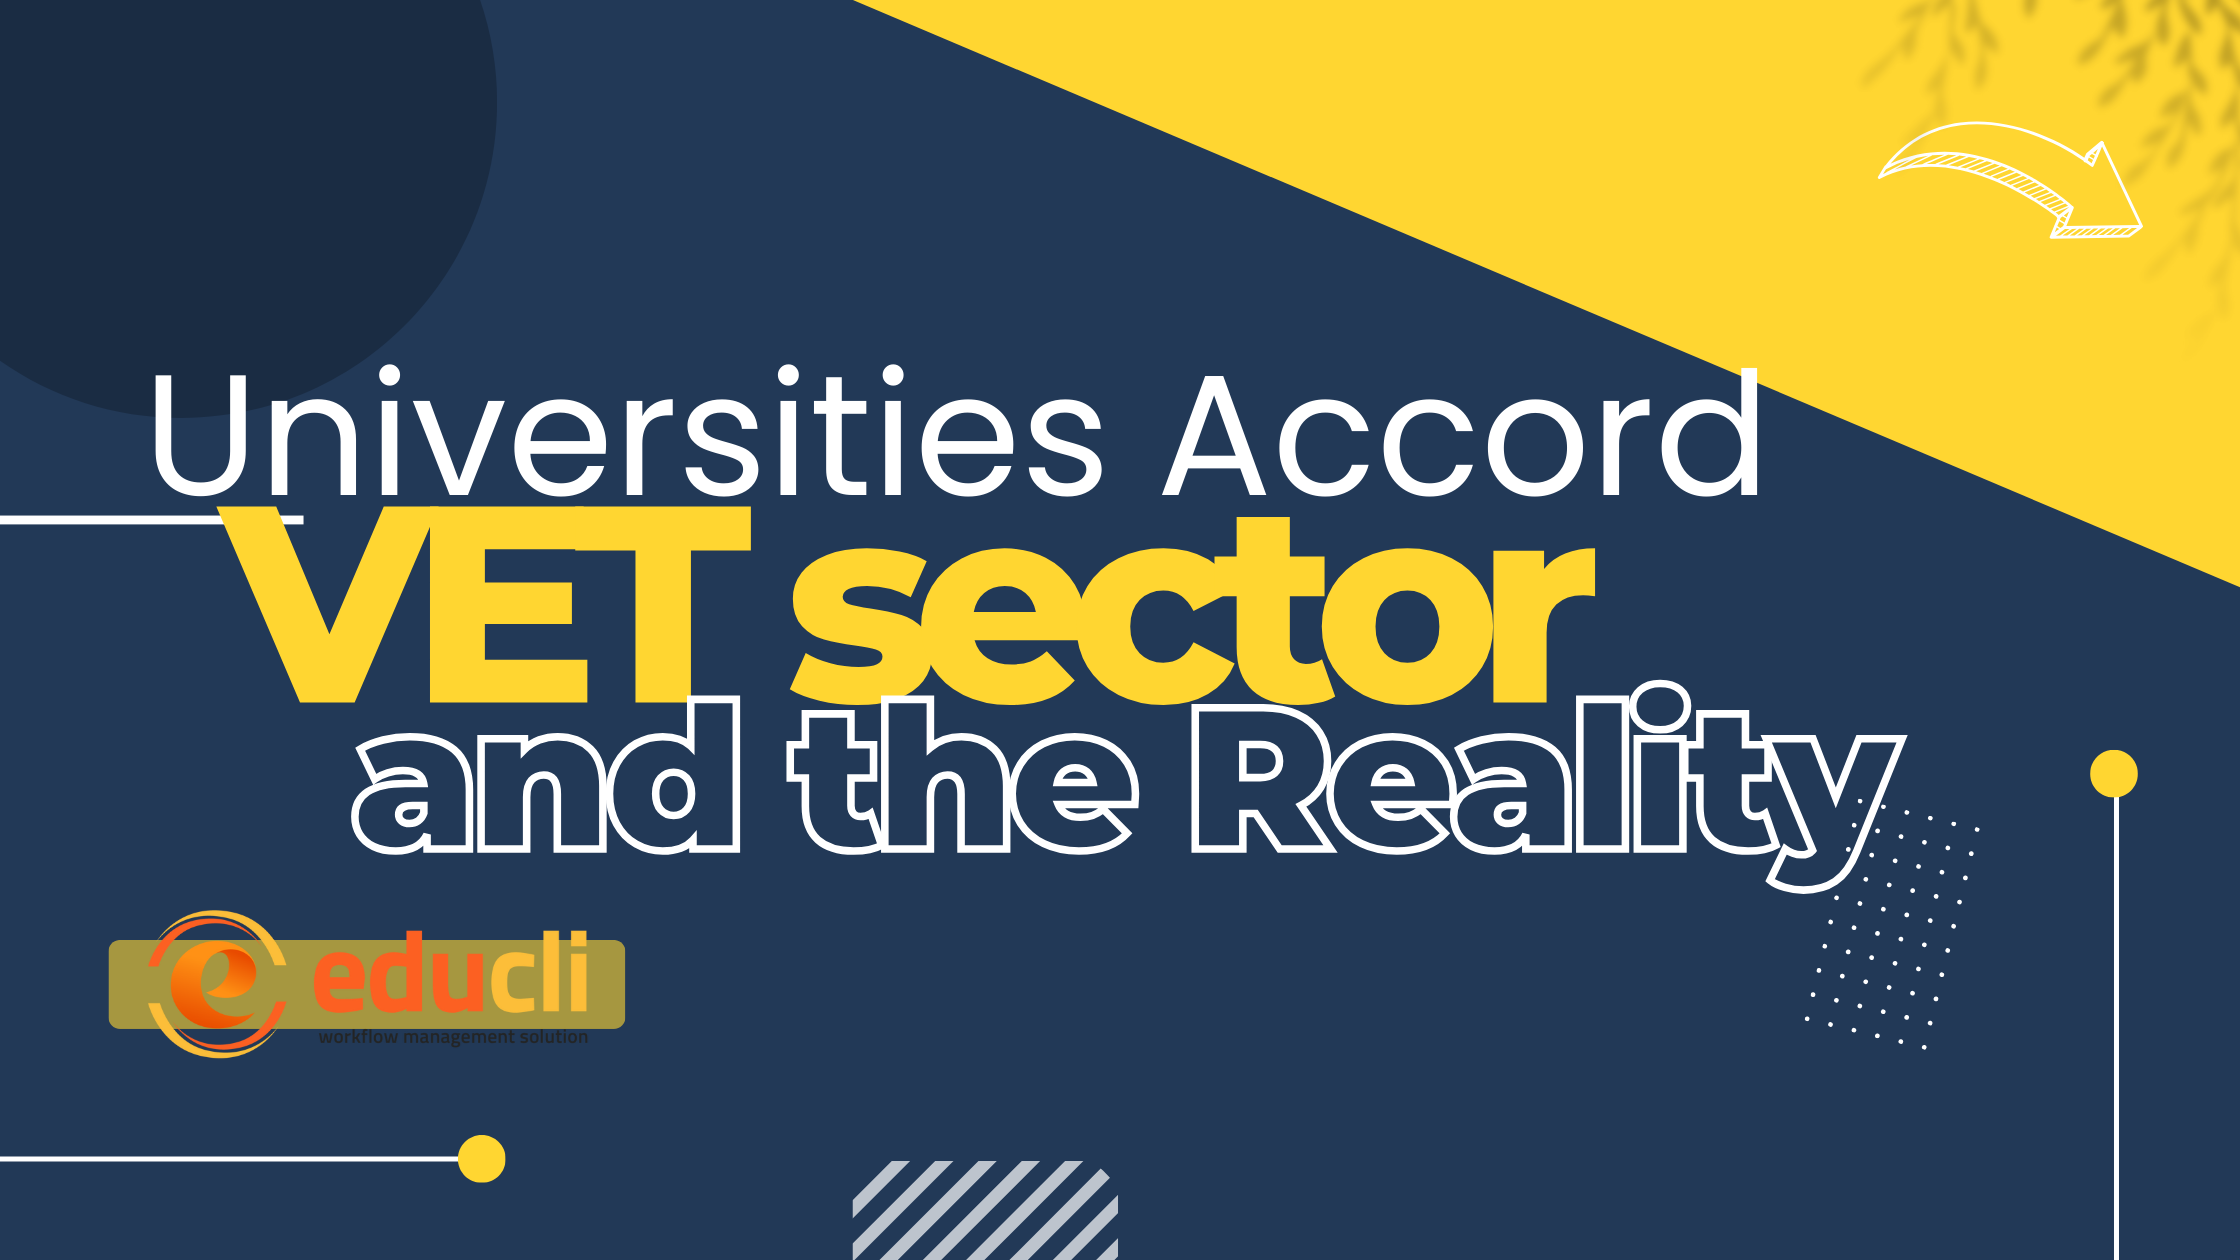 Universities Accord, Vocational and Technical Education - and the Reality